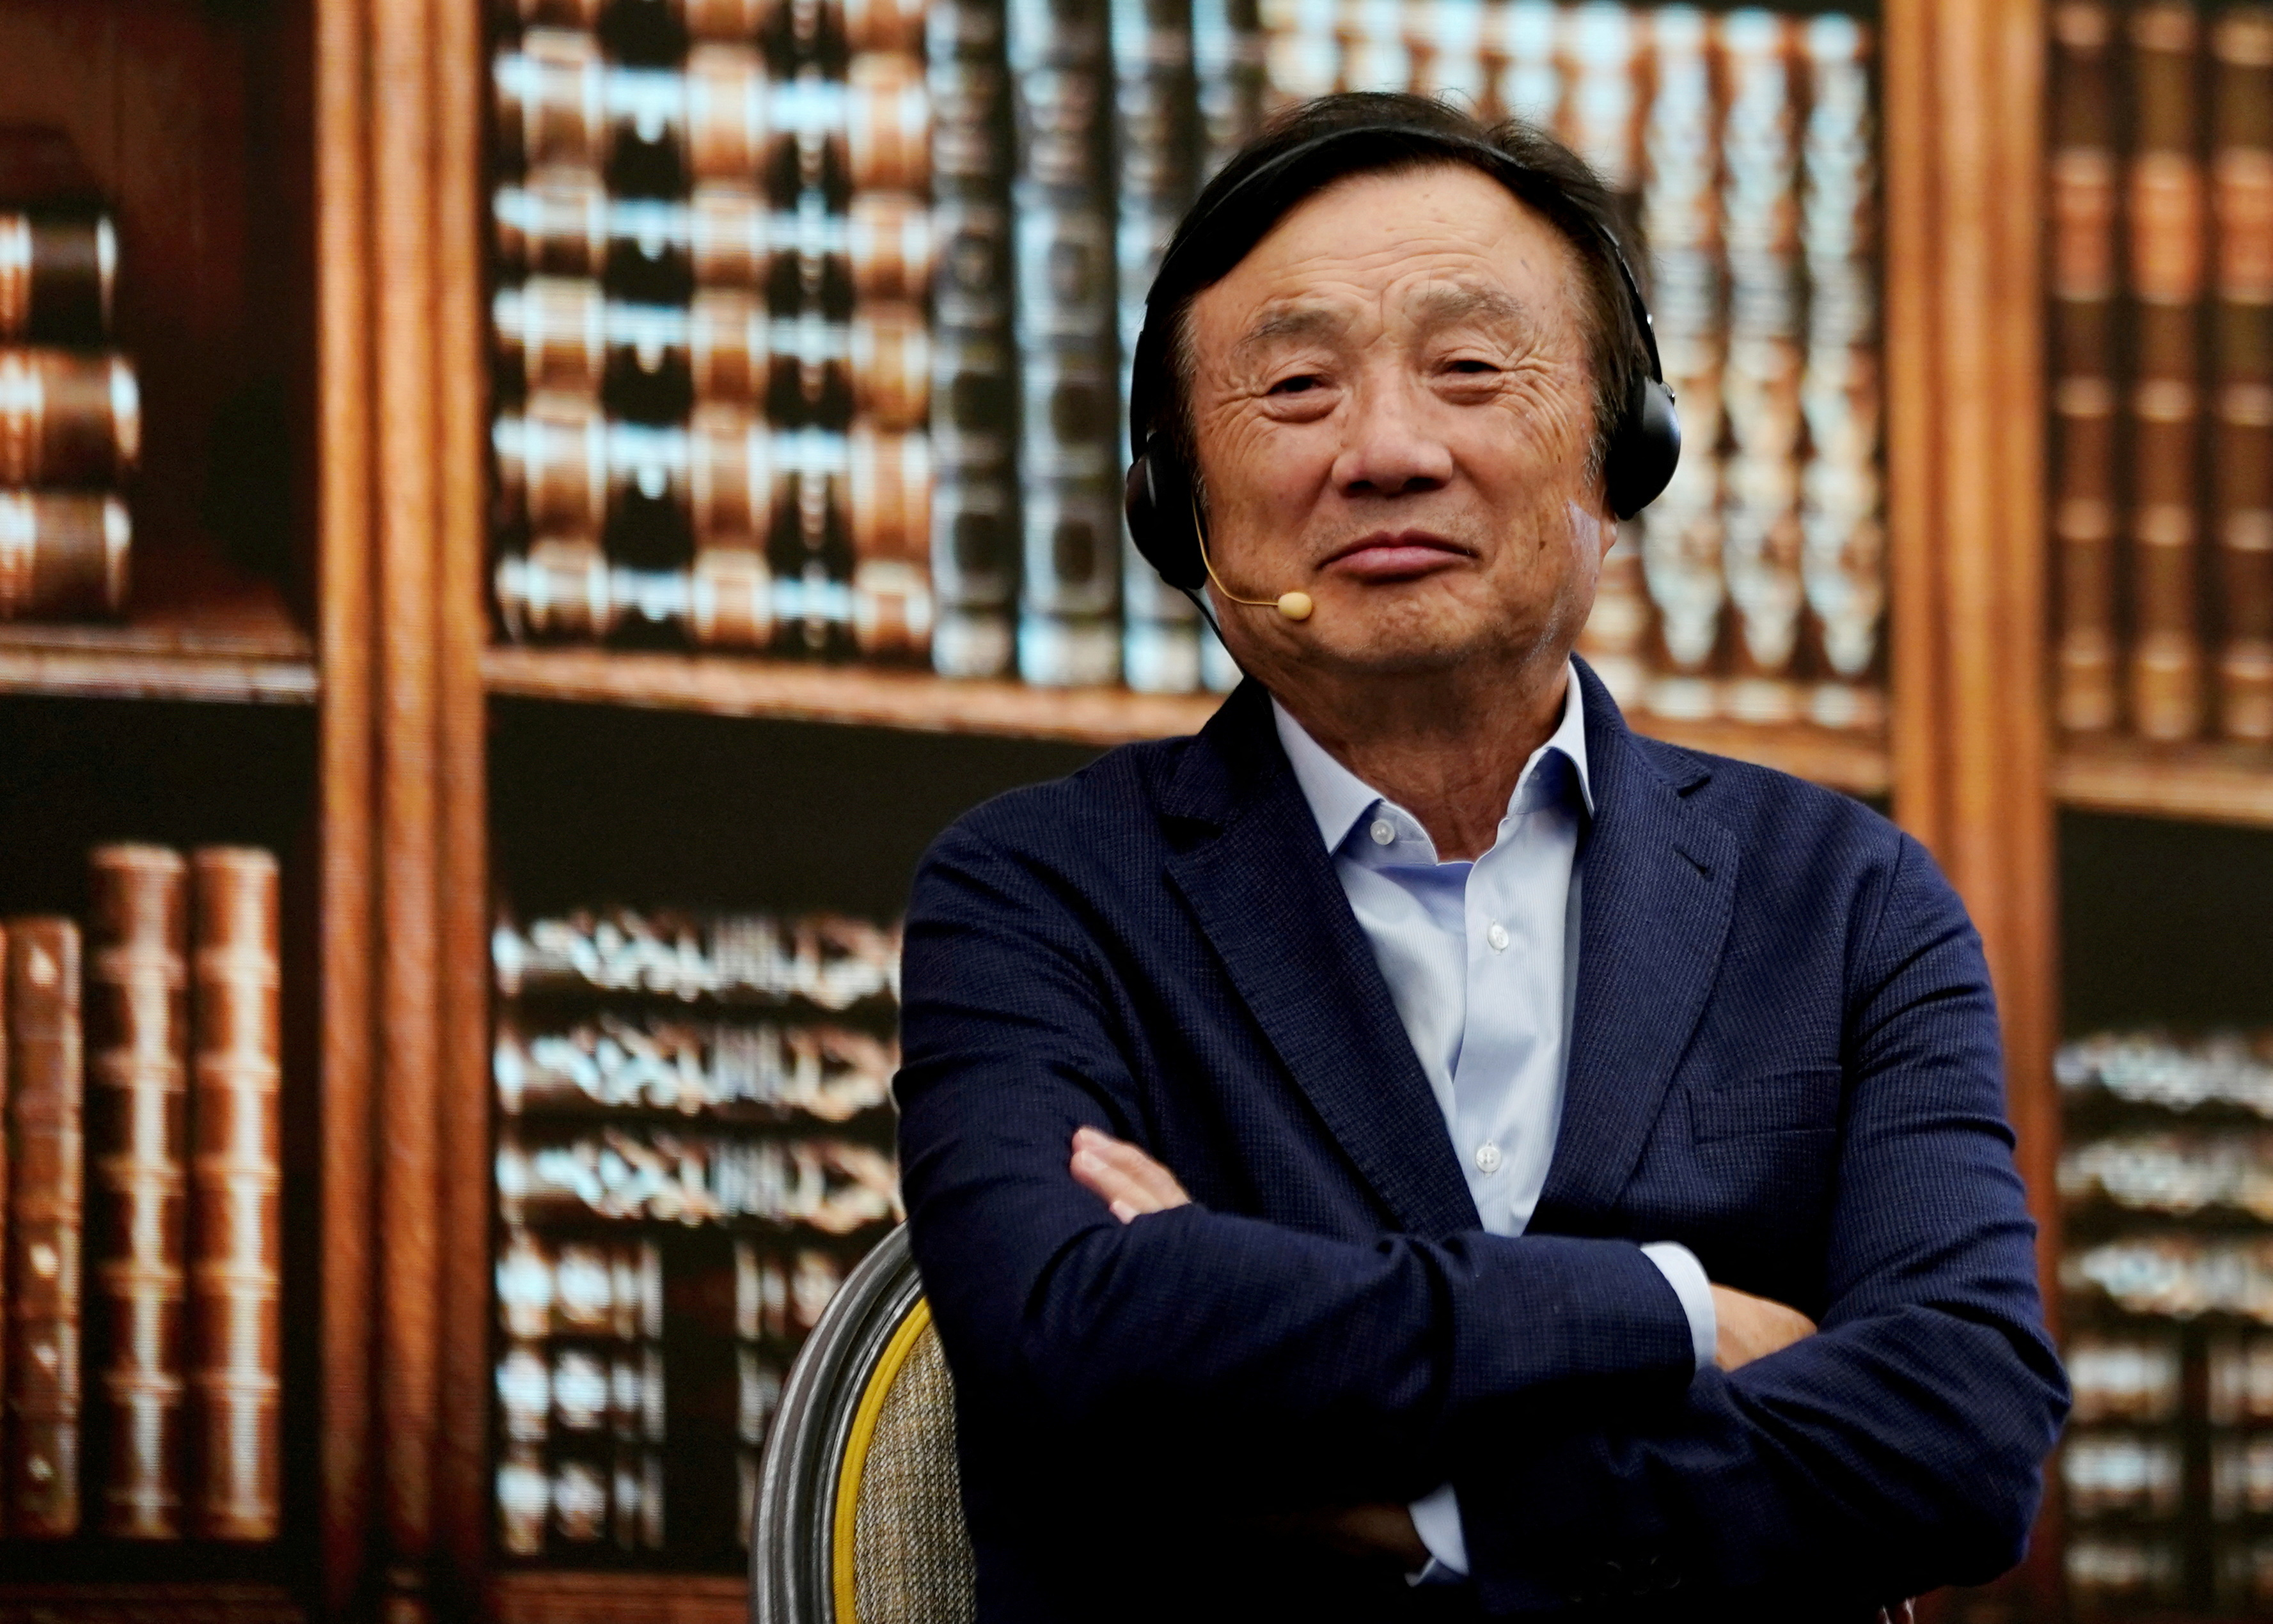 Founder of China's Huawei urges focus on cash flow, survival in downturn - media